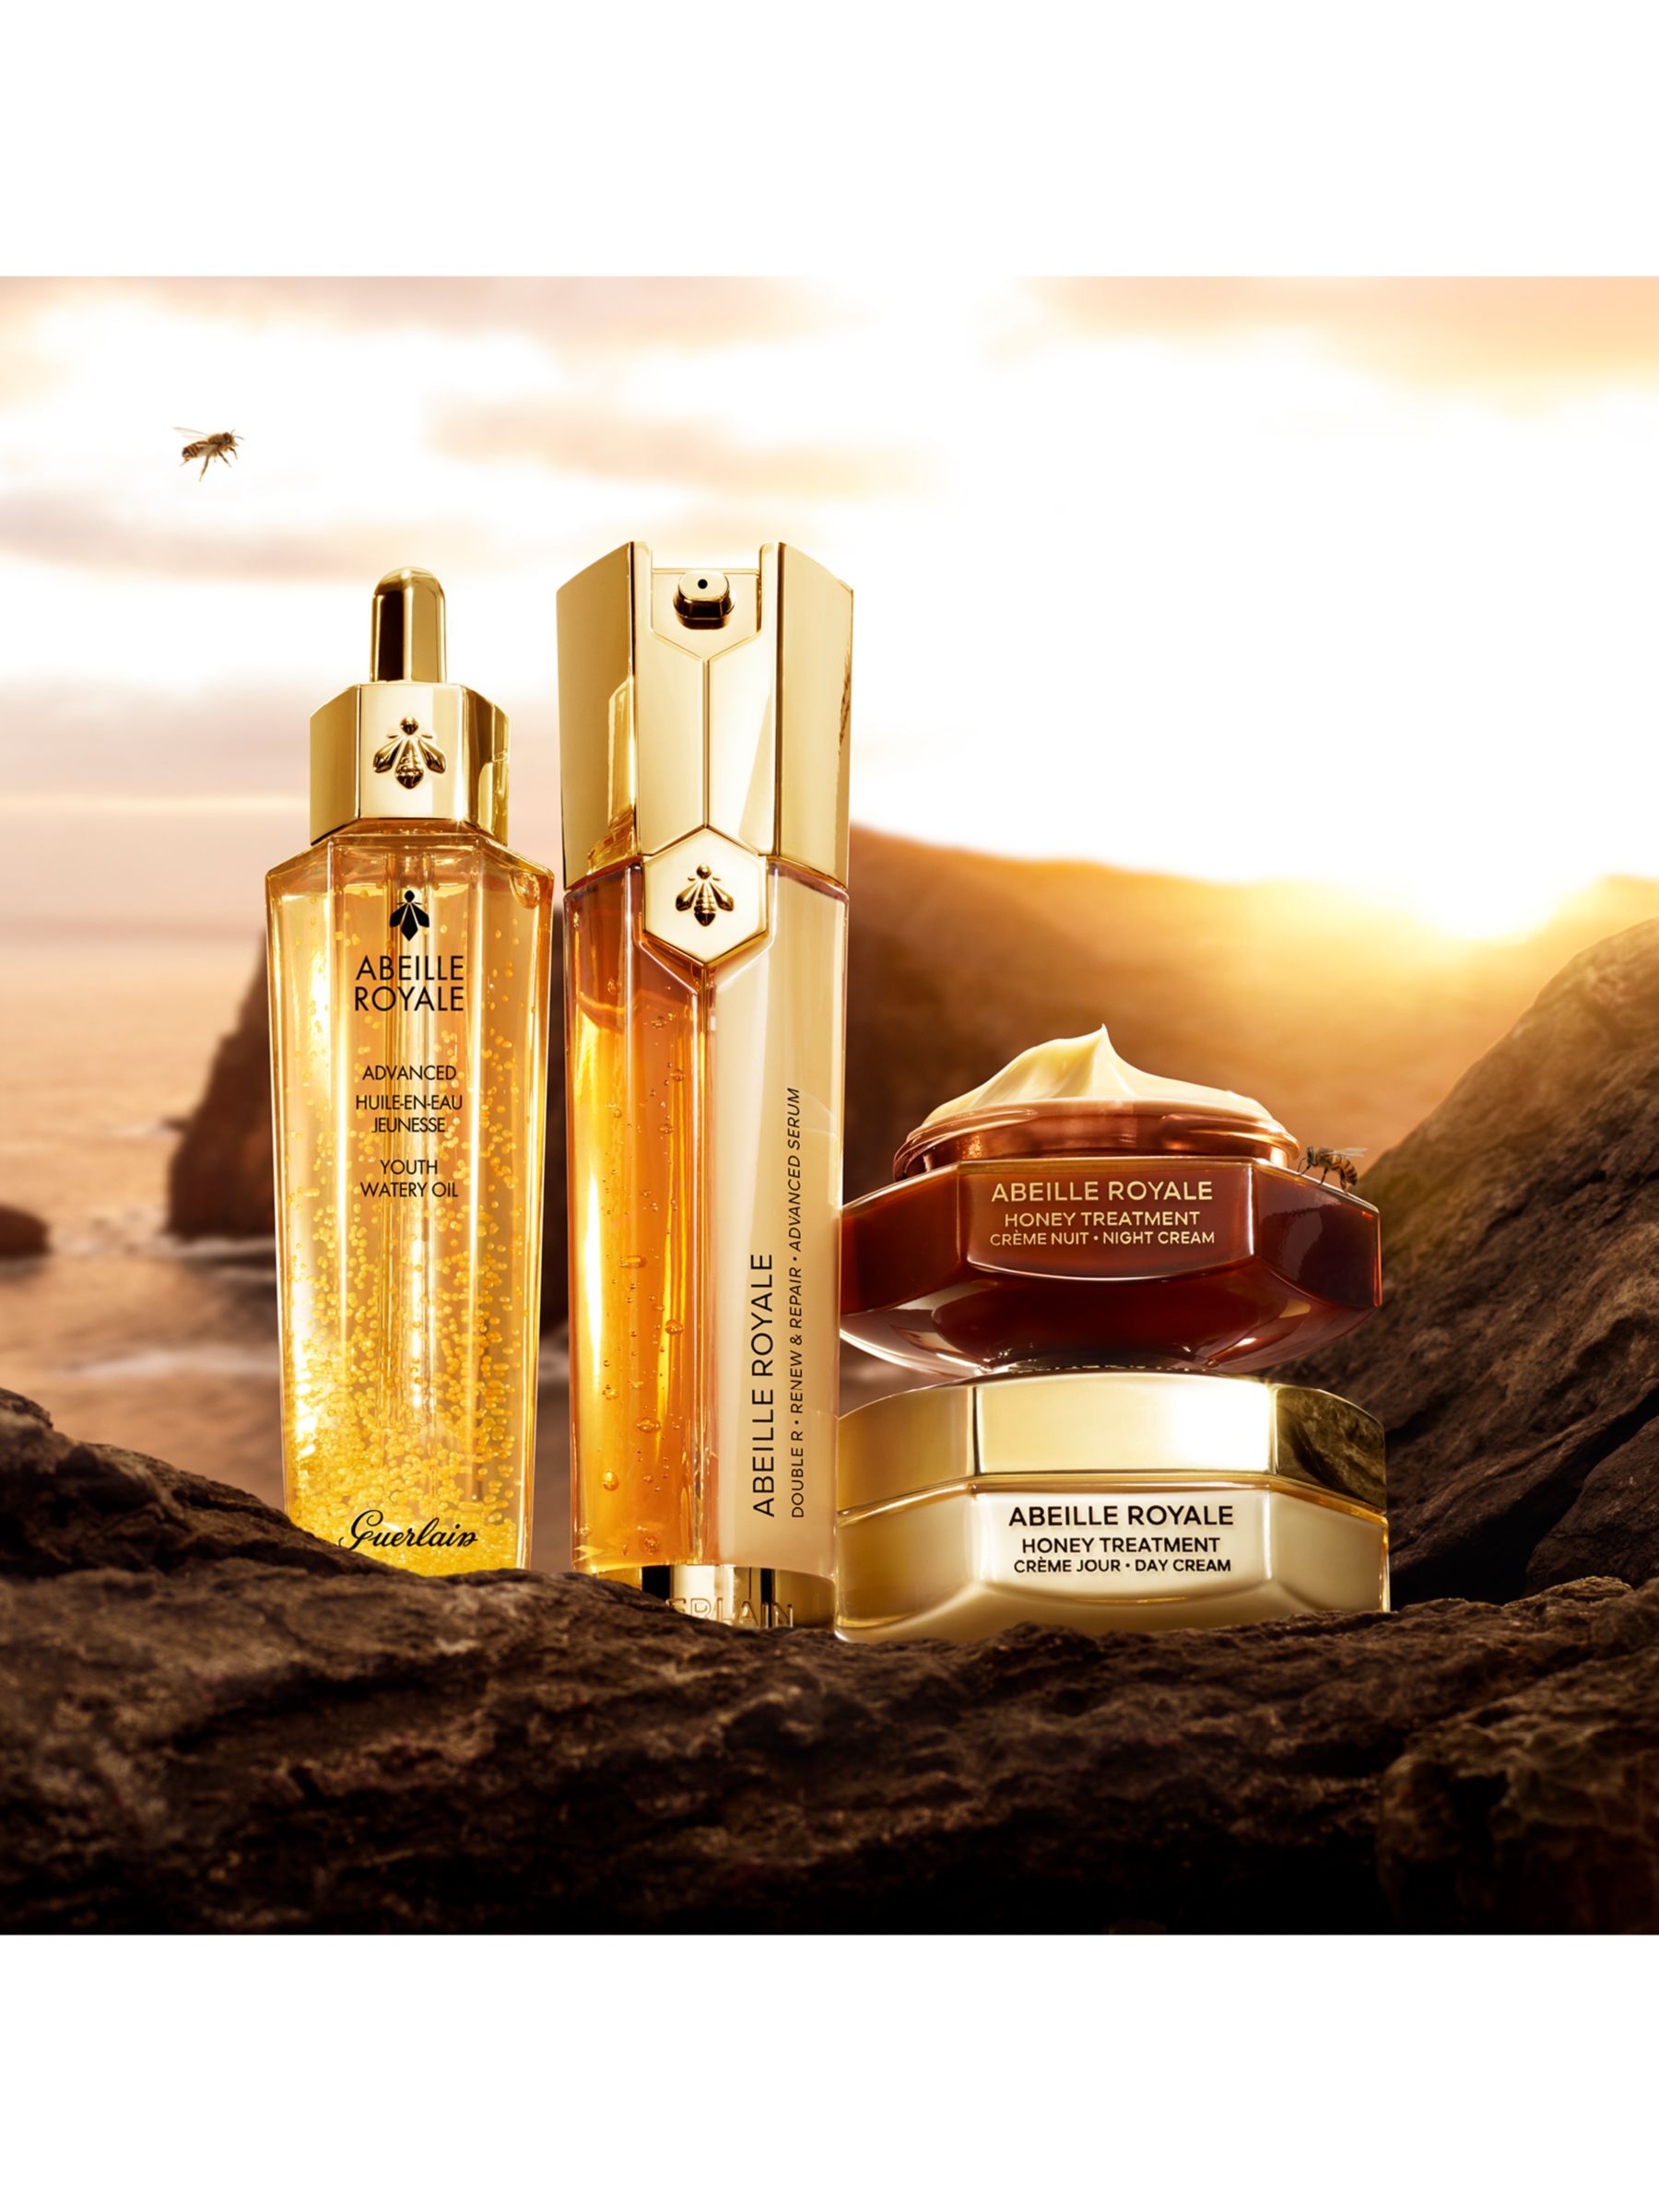 Guerlain Abeille Royale Advanced Youth Watery Oil Age-Defying Programme Skincare Gift Set 3